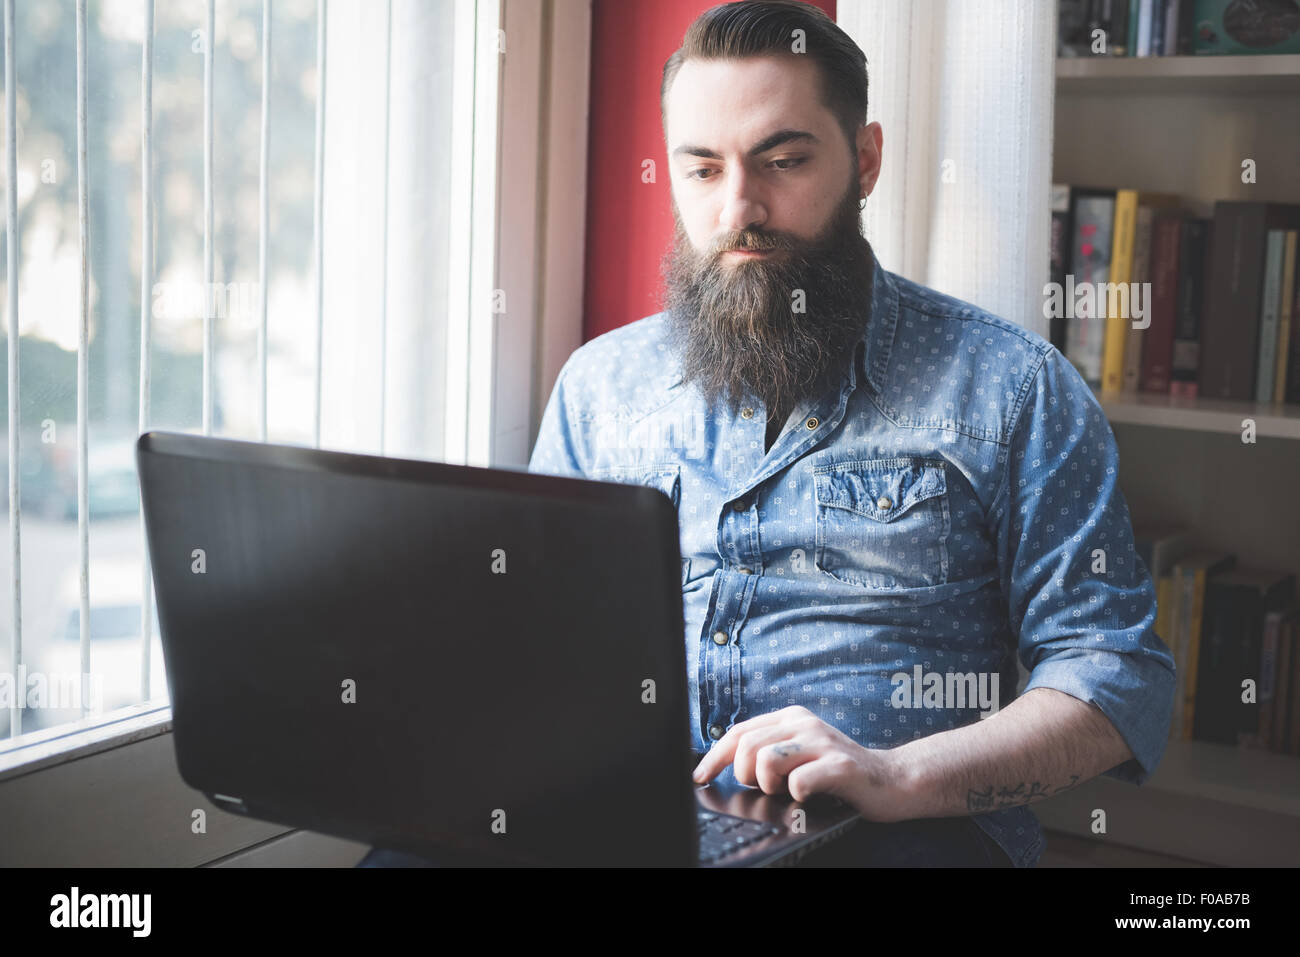 Young bearded man using laptop on floor Stock Photo